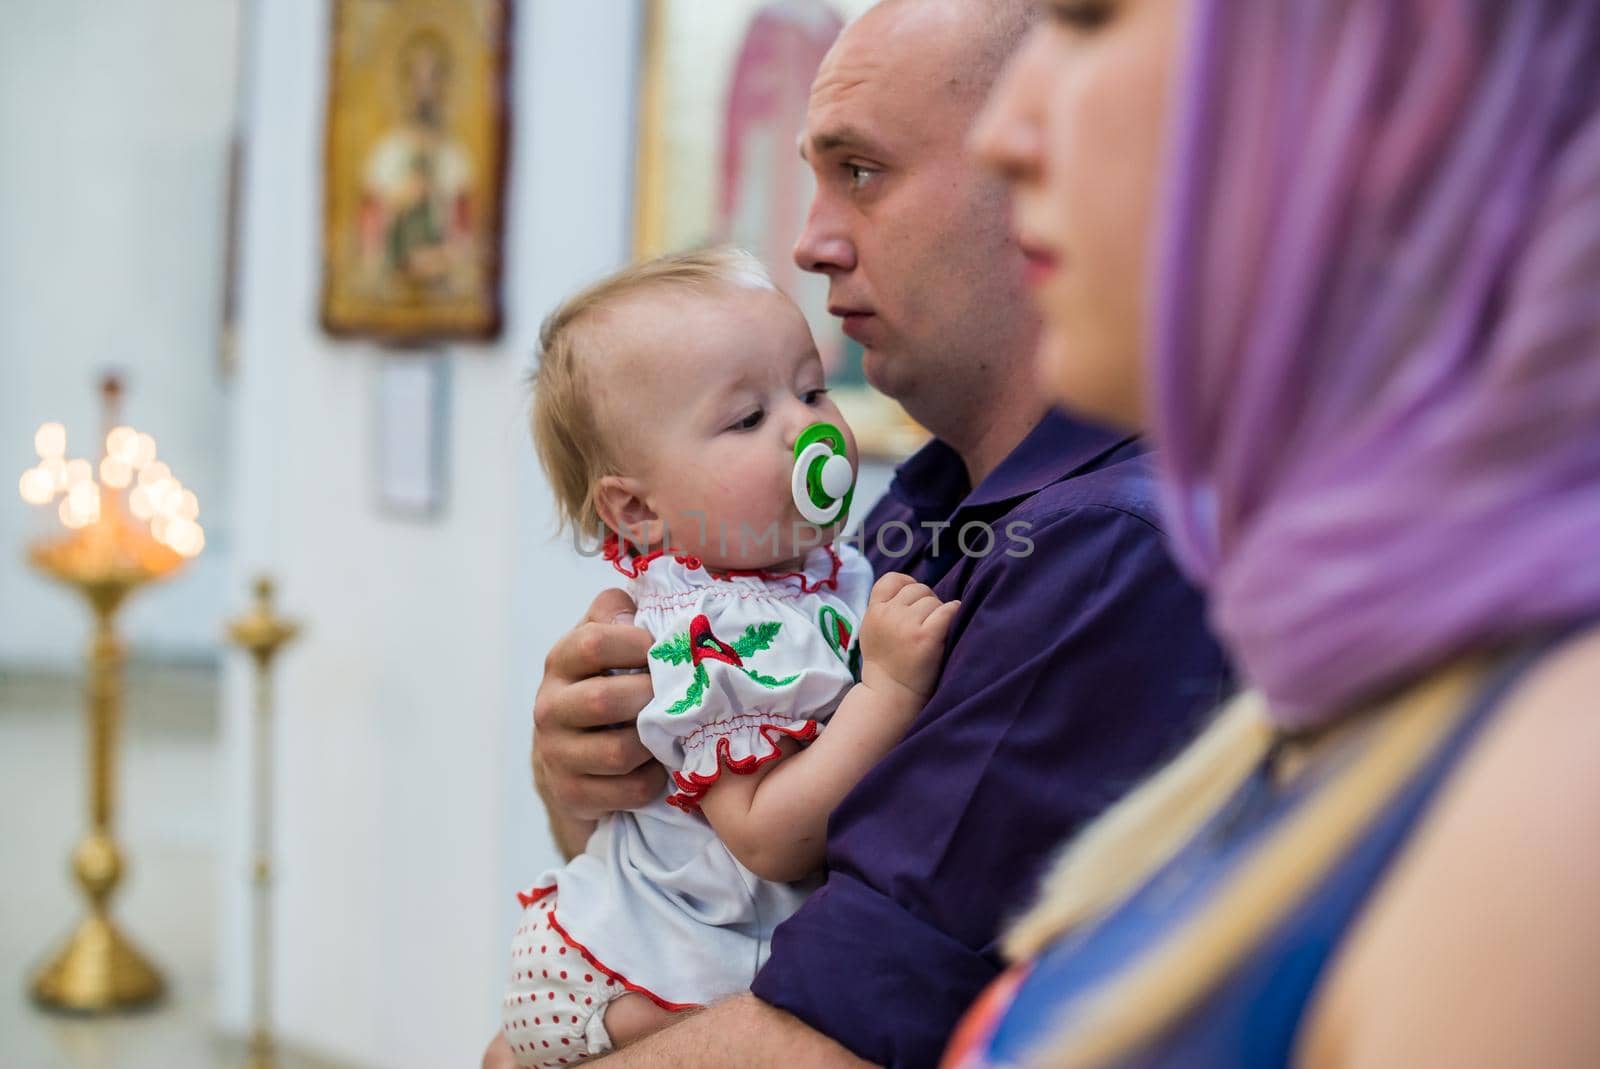 The sacrament of baptism. Newborn baby during christening and chrismation